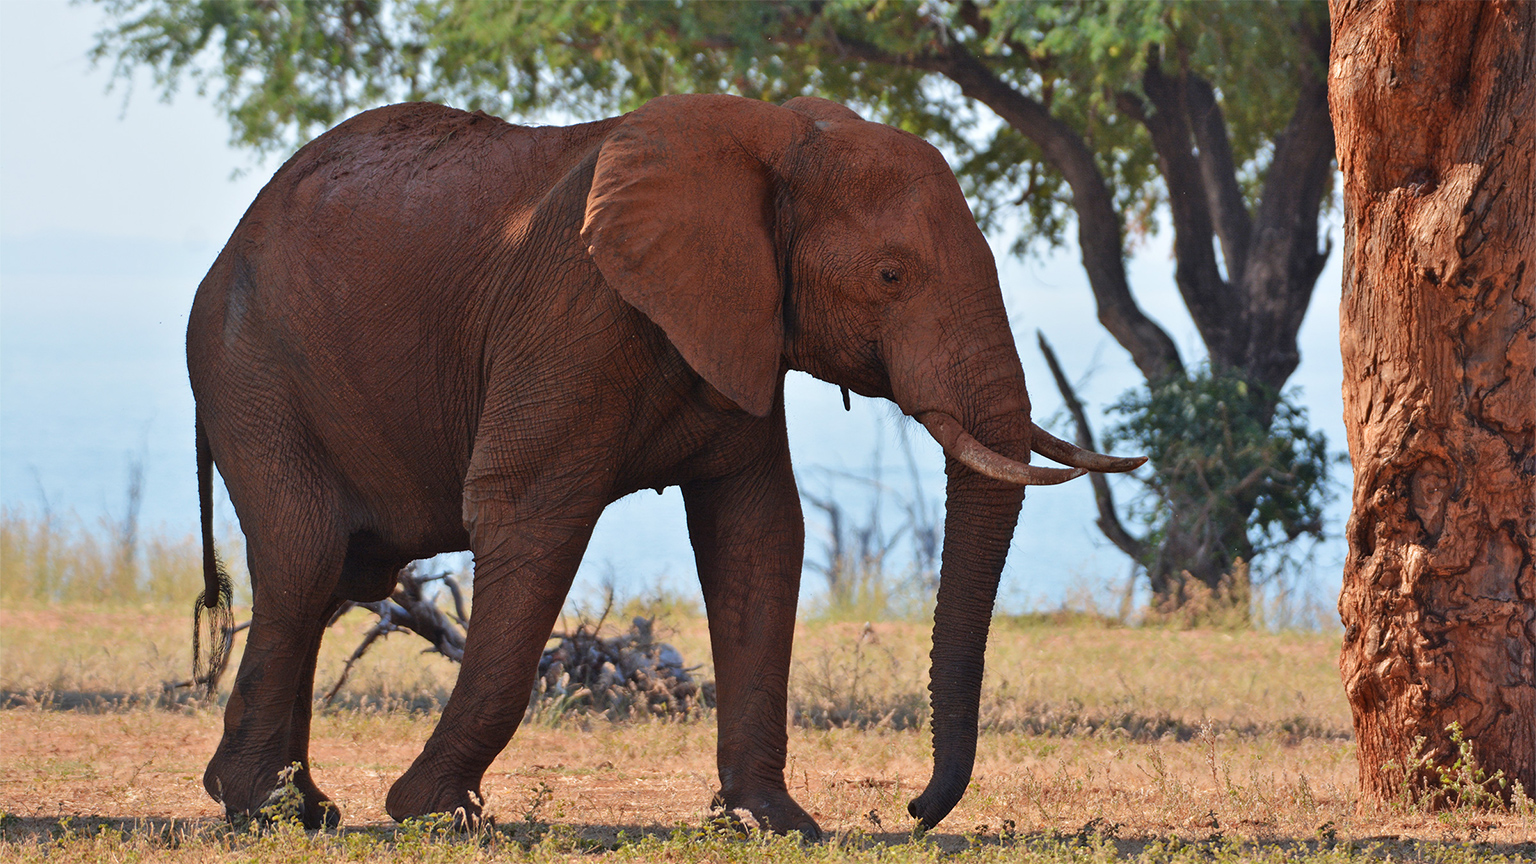 An elephant in Cameroon.